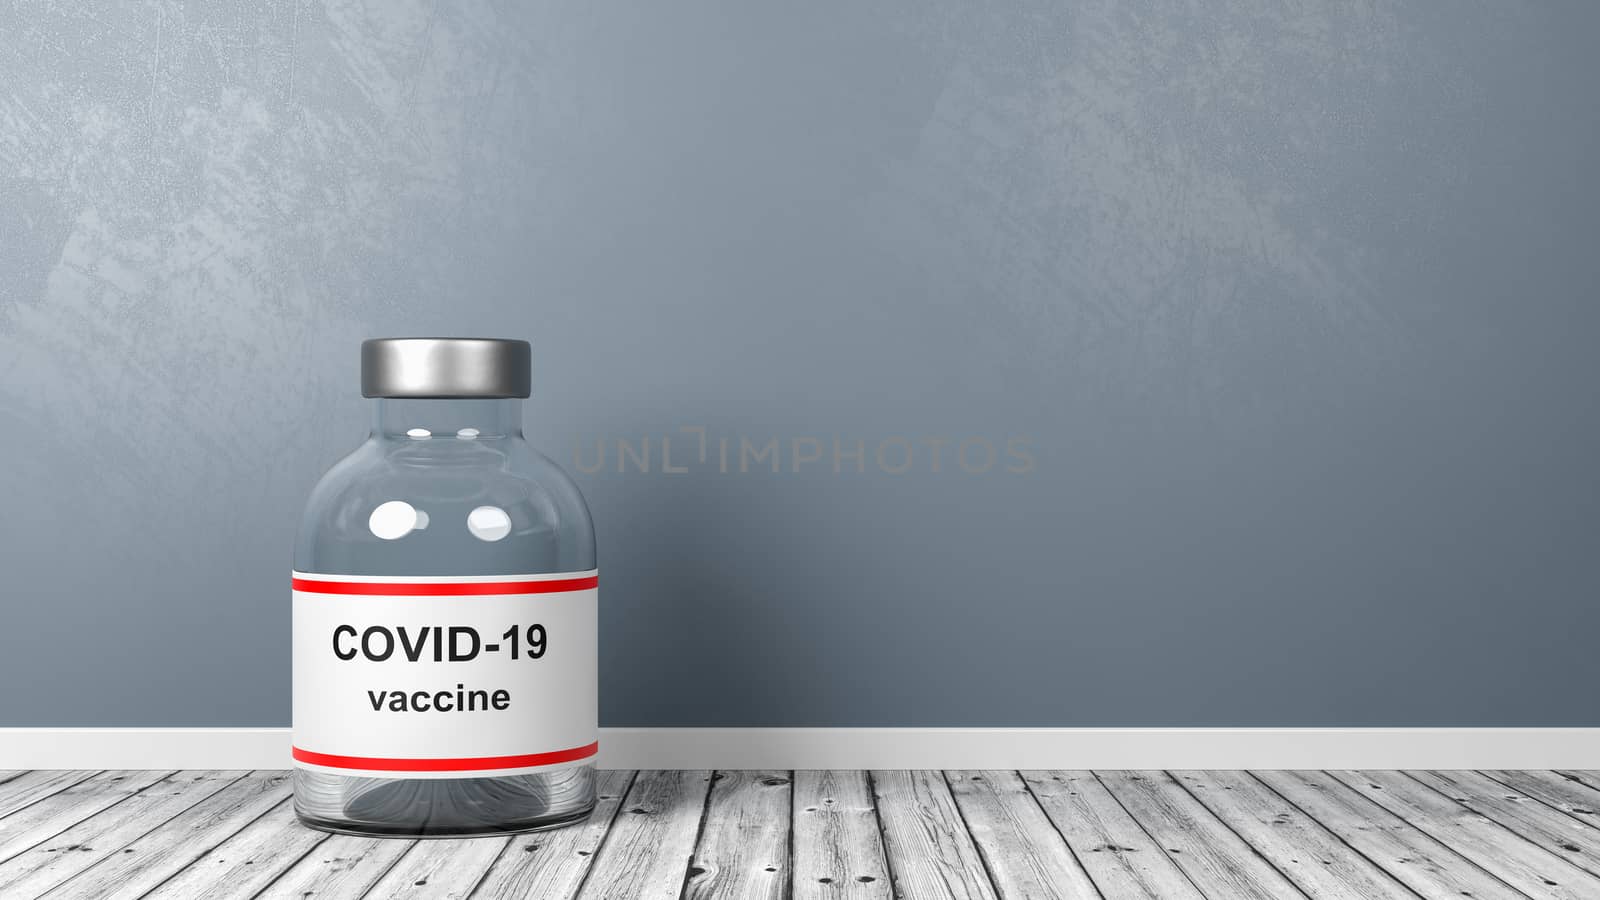 One Covid 19 Vaccine Bottle on Wooden Floor in a Gray Wall Room with Copy Space 3D Render Illustration